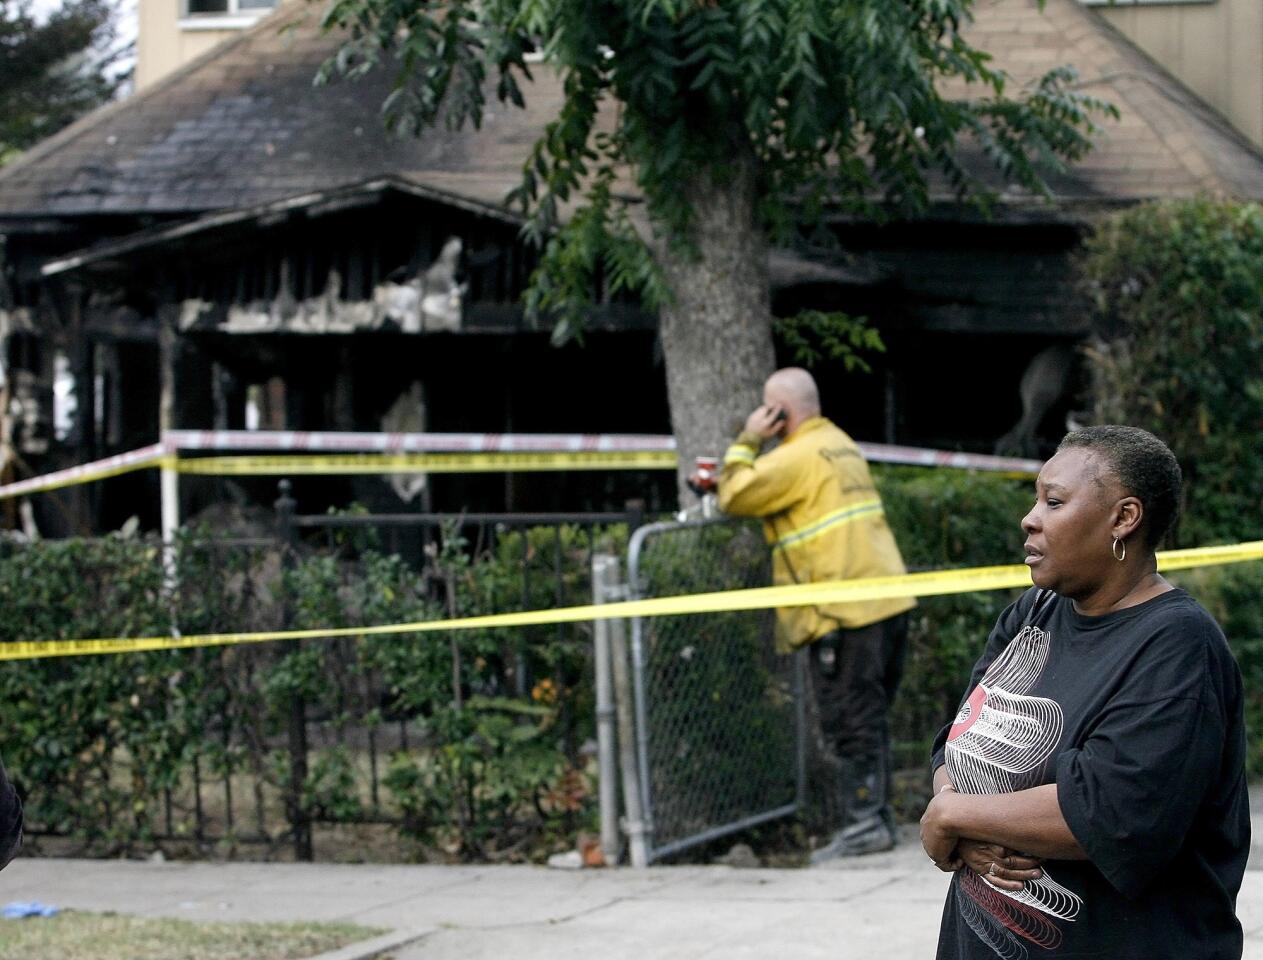 Pamela Clark, estranged wife of one of the two men who died in an early morning fire, stands near the gutted home on the 1300 block of El Sereno Avenue in Pasadena.